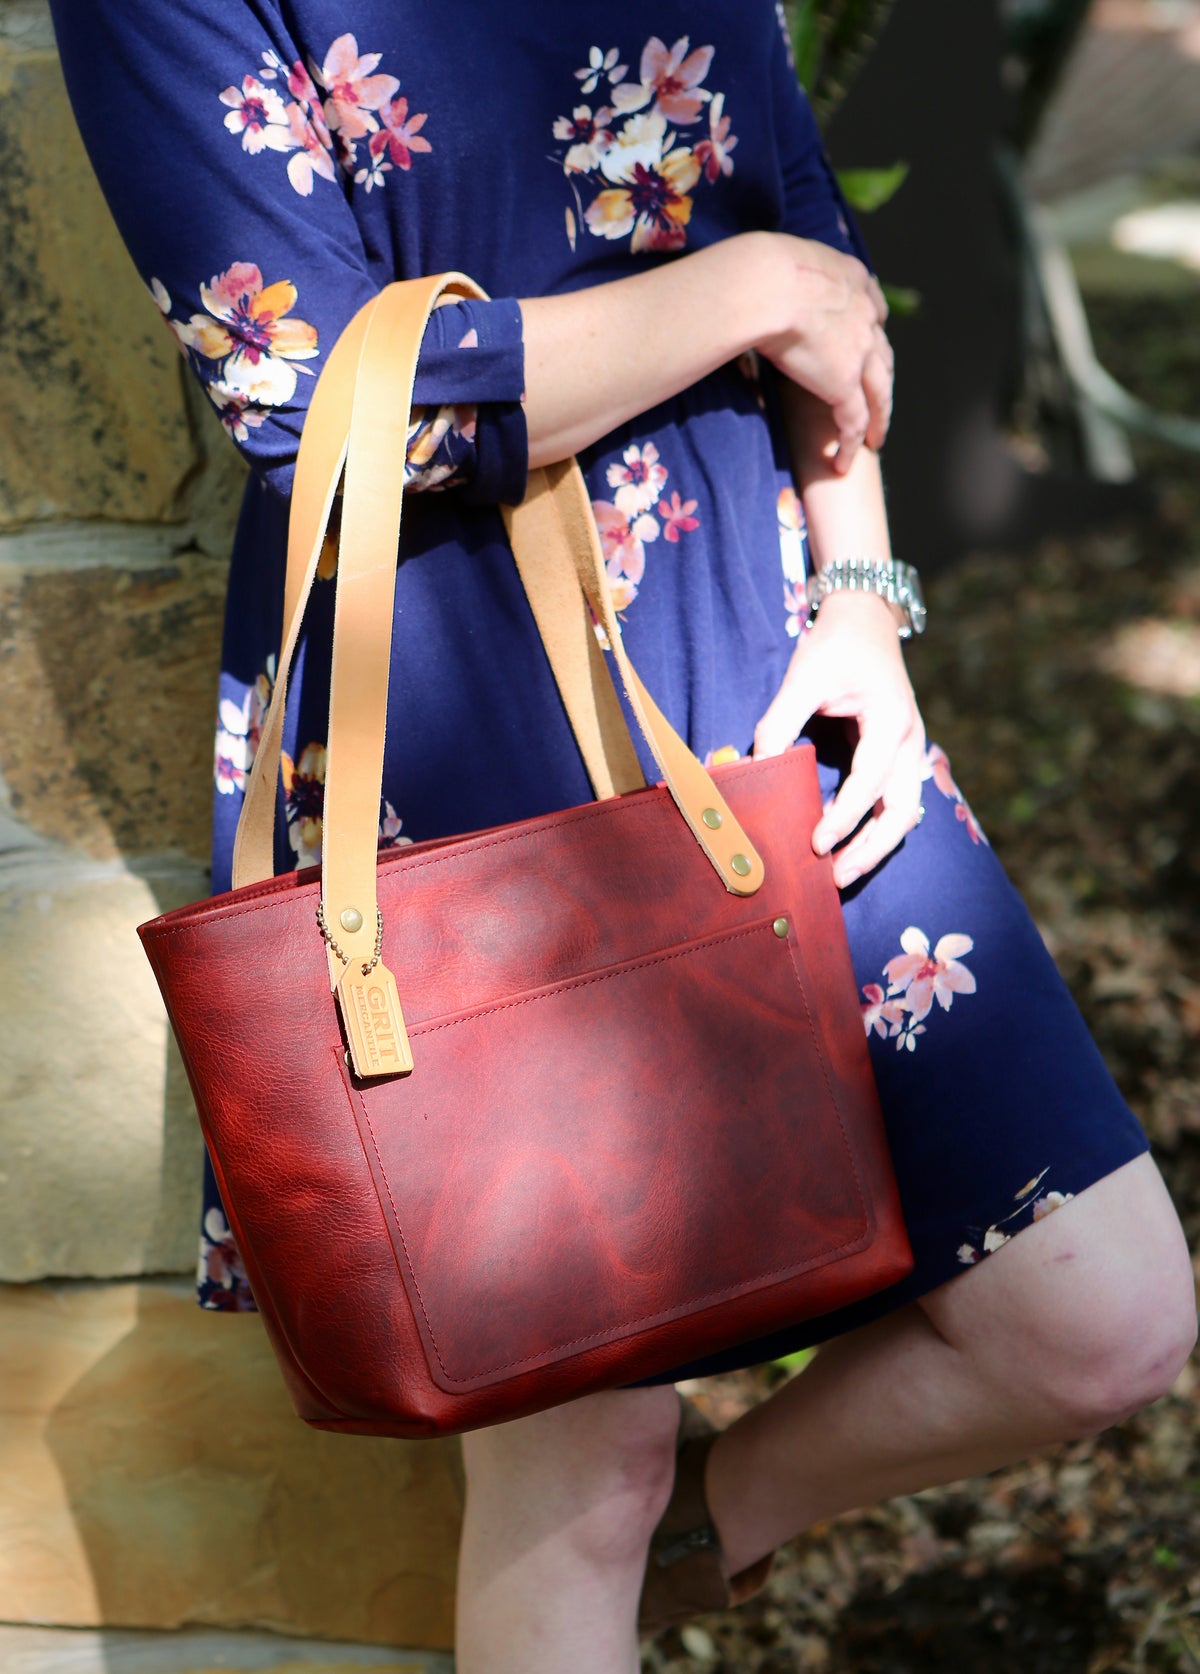 Red Ethel Tote Bag  with russet tan vegetable tanned straps hanging from model's elbow. Model is wearing a blue dress with pink, white and yellow flowers and is leaning against a tan stone wall.